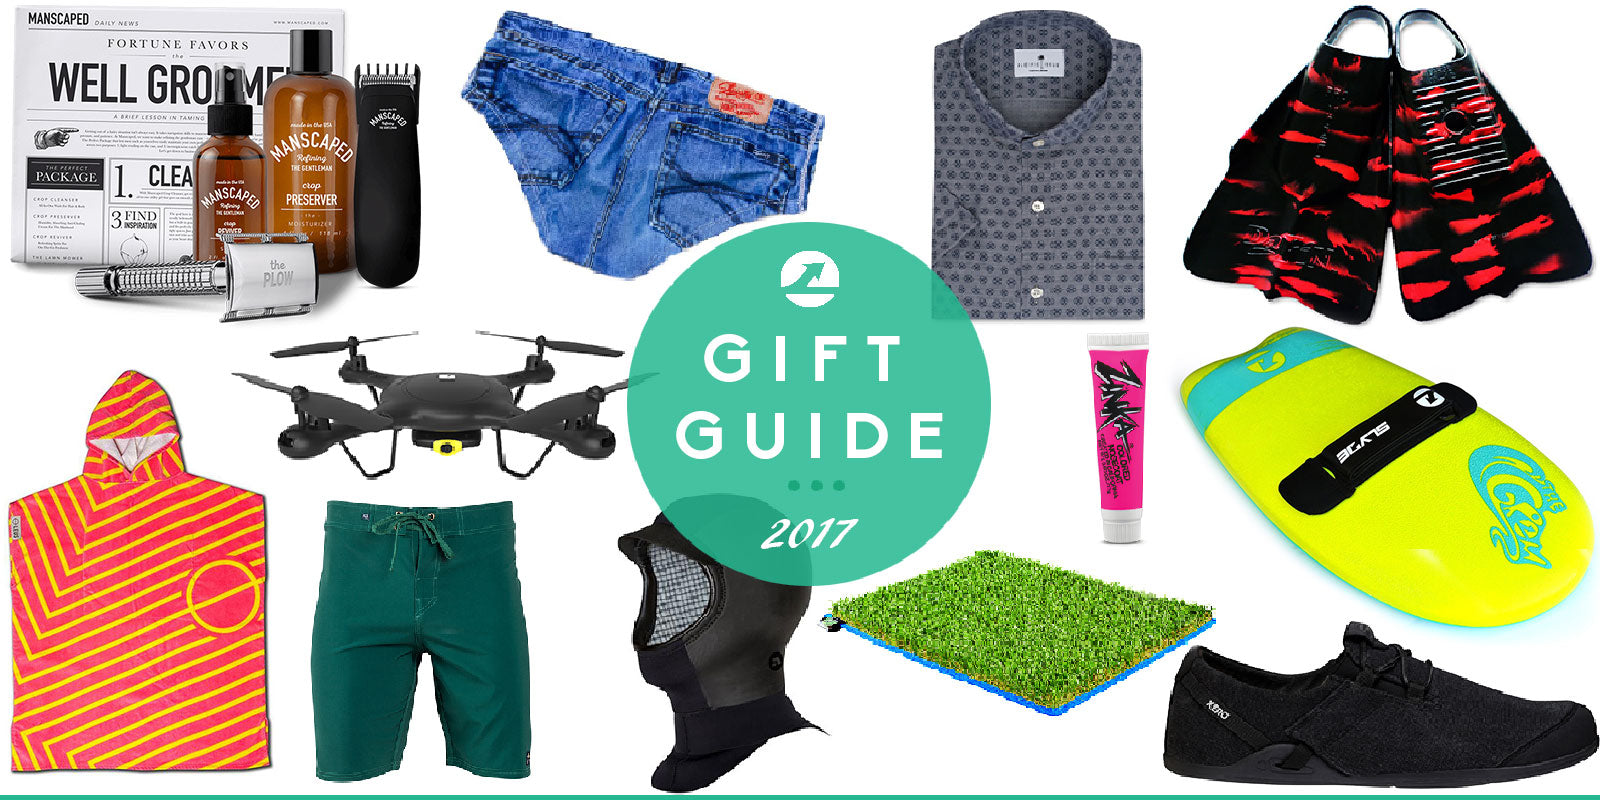 Beach Lovers Gift Guide 2017:12 Epic Holiday Gifts For A Beach Bum